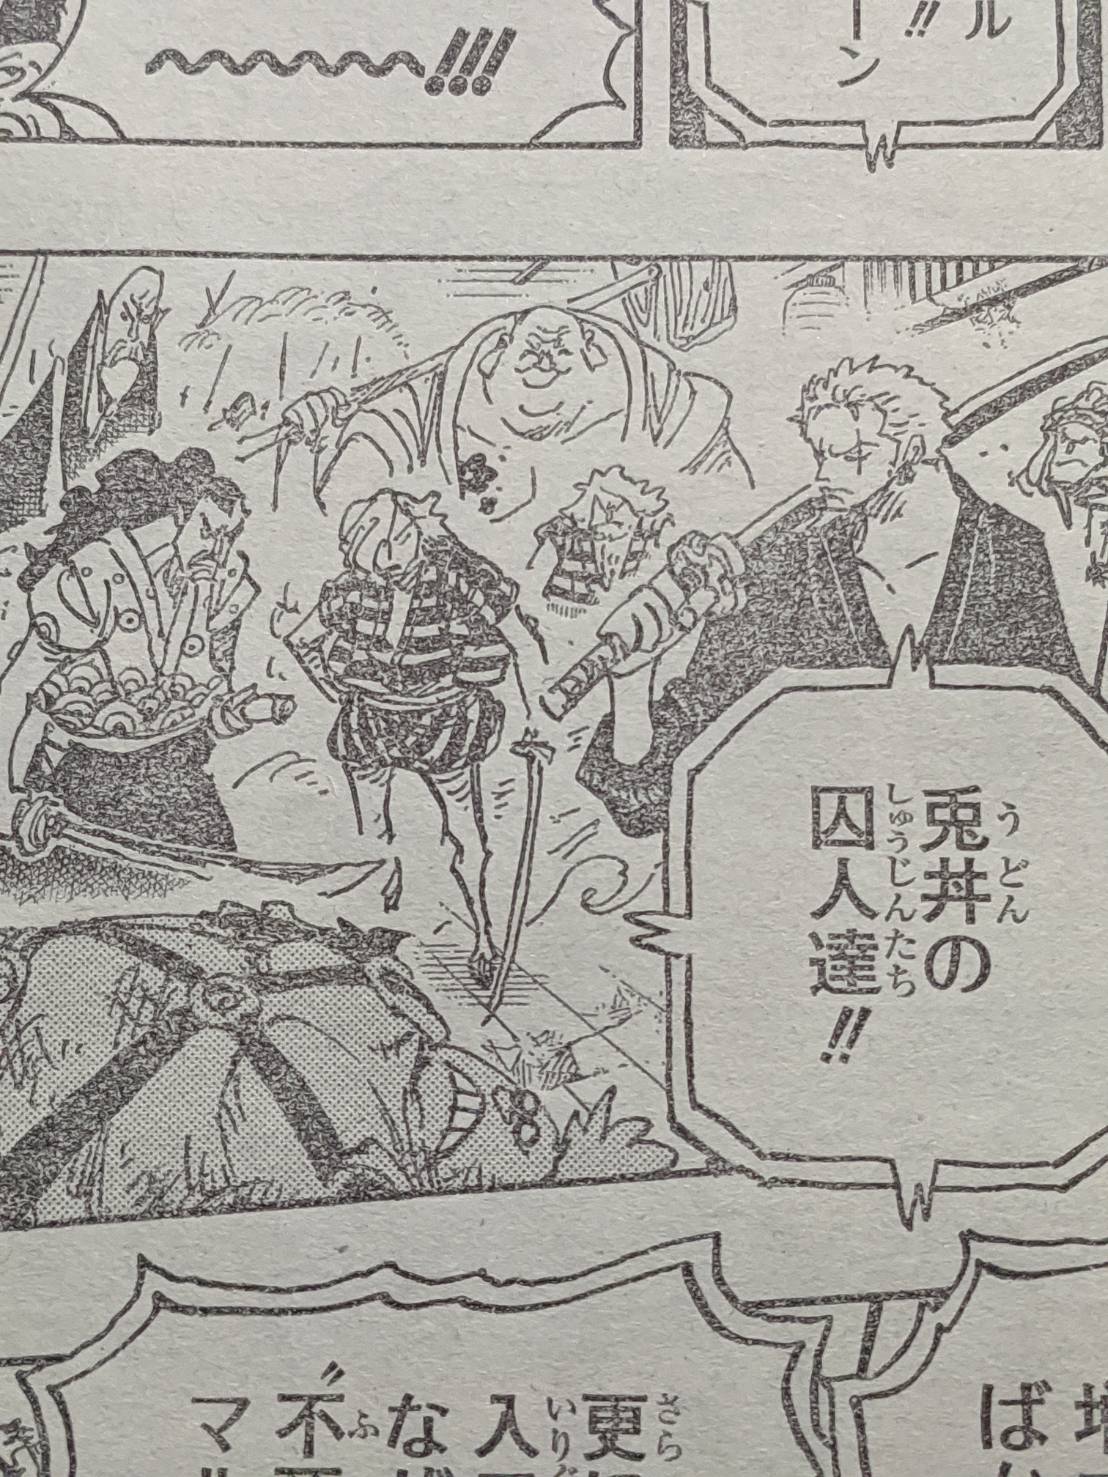 Onepiece9話考察 ゾロvsササキ 閻魔の真骨頂 覇王色覚醒の気配 ワンピース考察 甲塚誓ノ介のいい芝居してますね Part 2